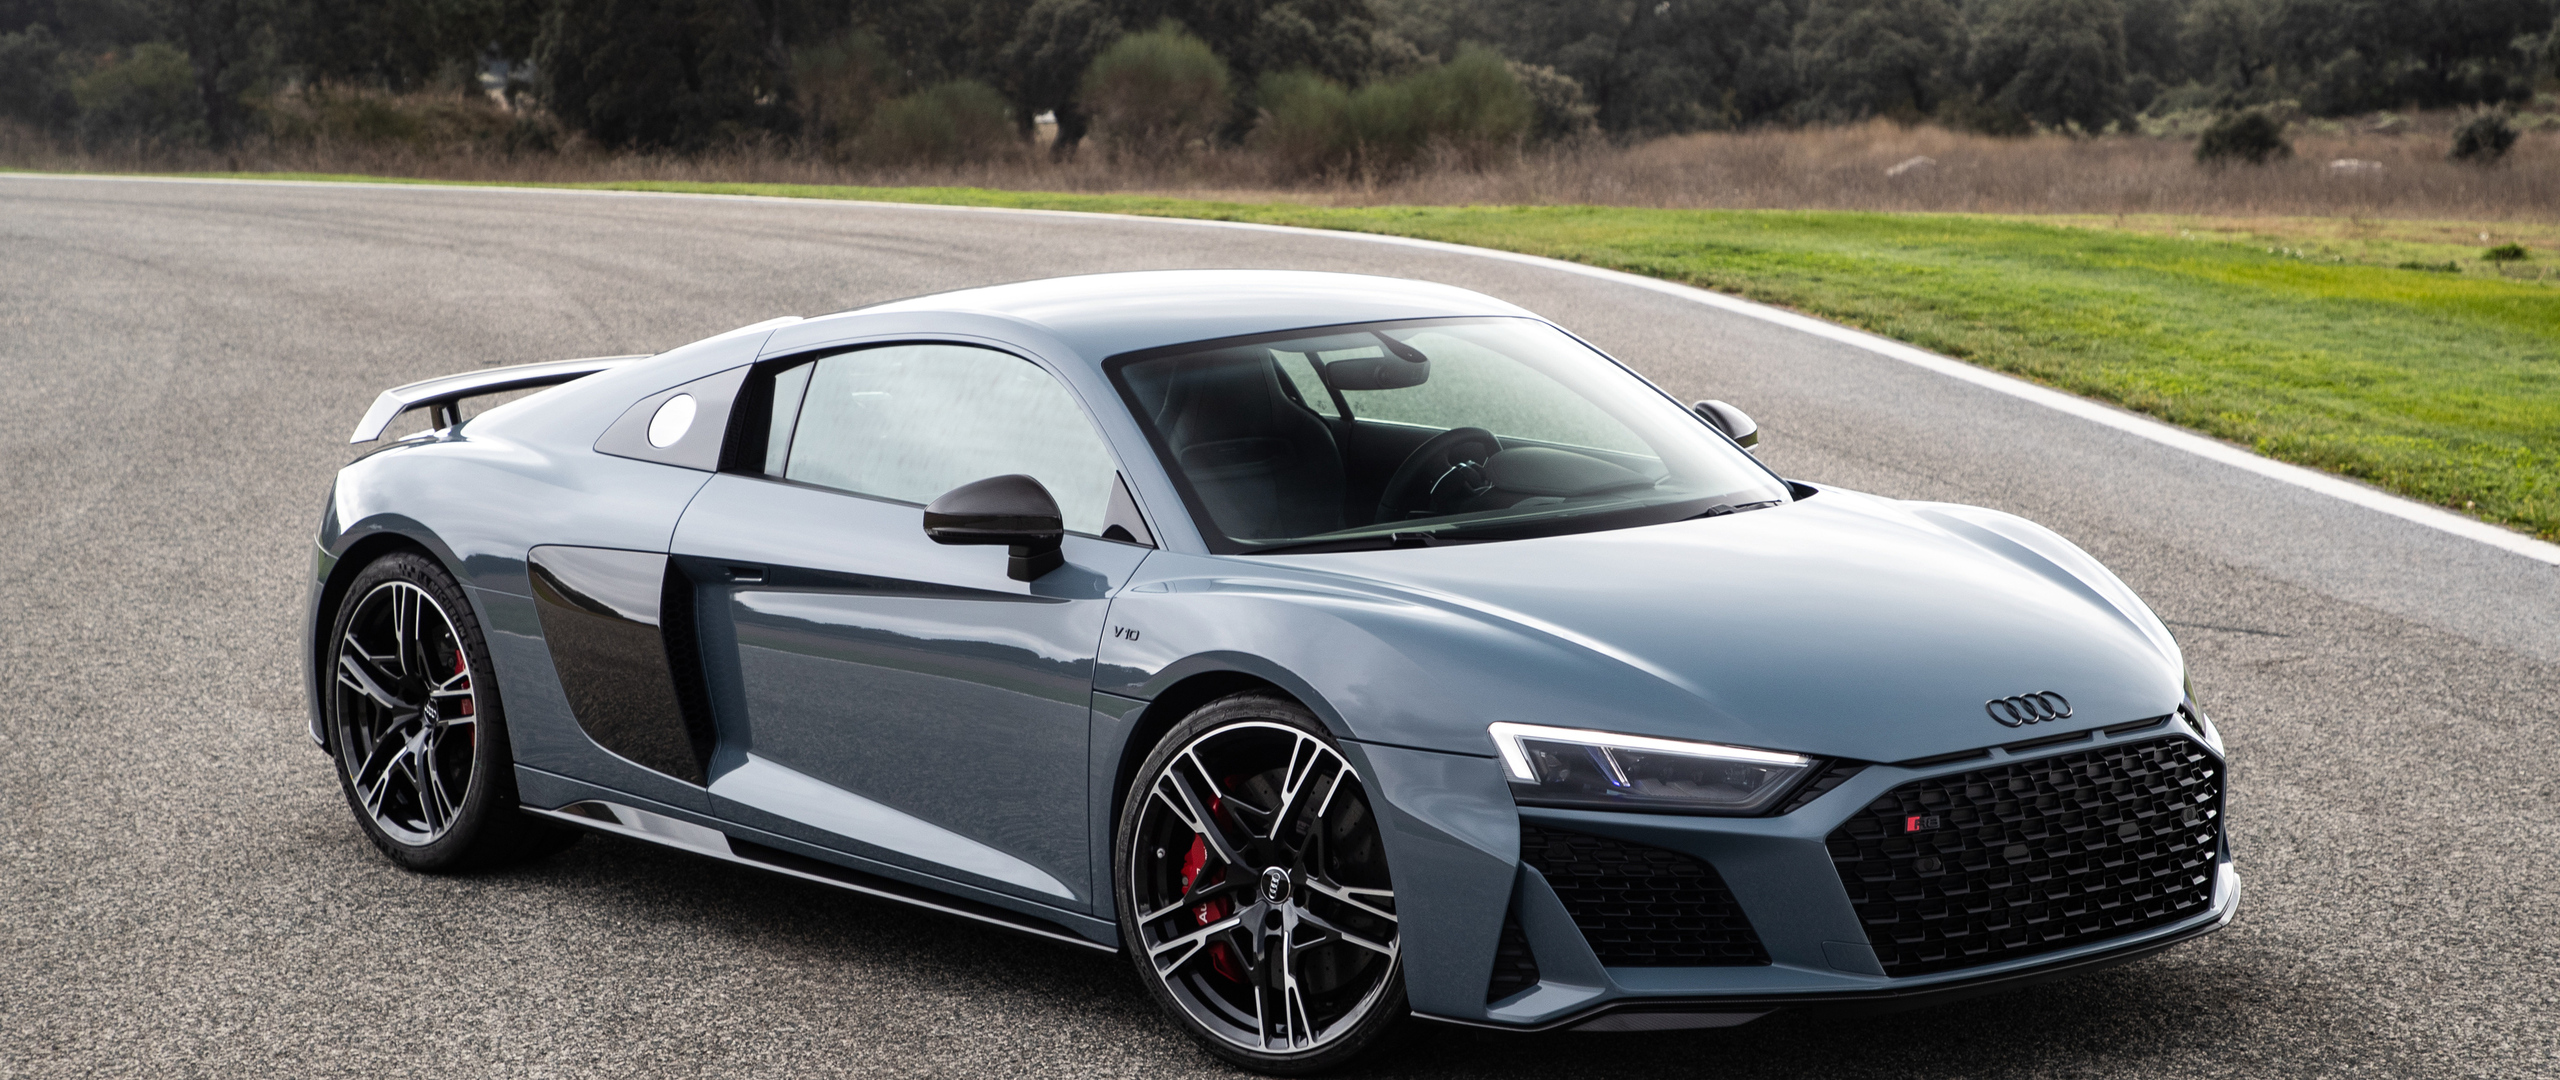 2560x1080 Audi R8 V10 2019 2560x1080 Resolution Hd 4k Wallpapers Images Backgrounds Photos And Pictures